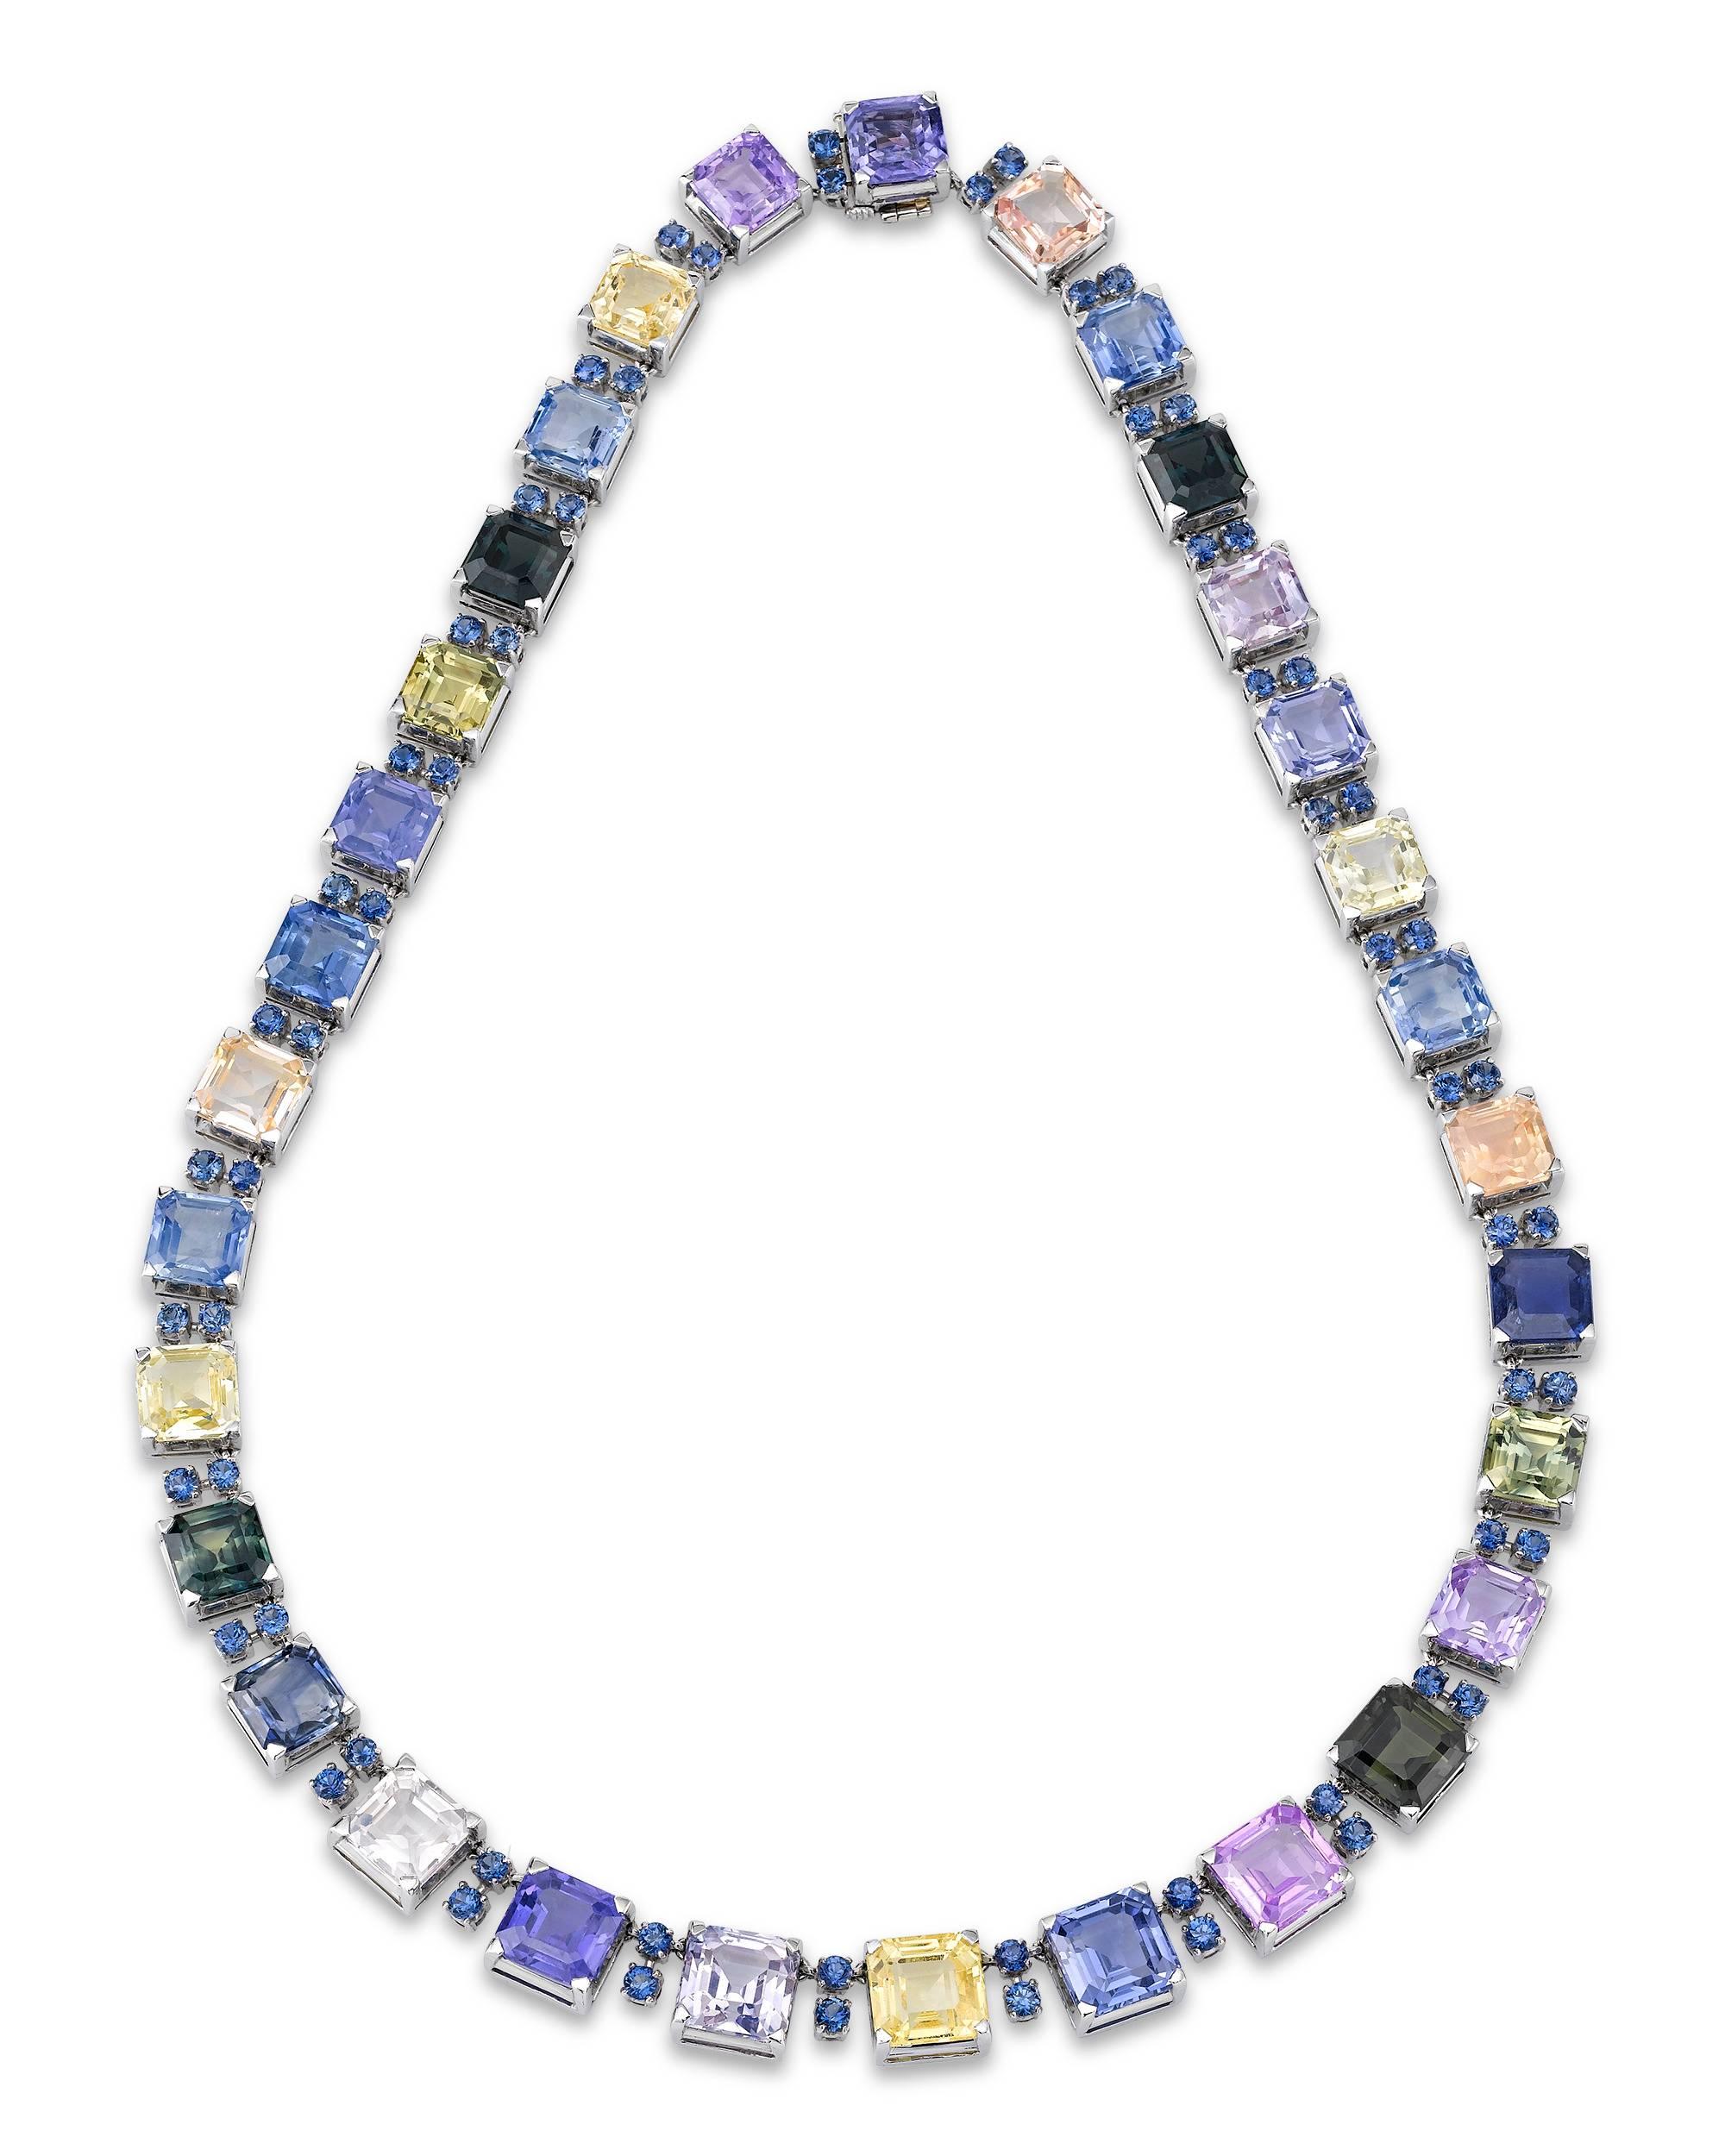 This extraordinary multi-color sapphire necklace is the work of the legendary jewelry designer Oscar Heyman. The dazzling strand showcases 115.72 total carats of spectacular sapphires that exhibit a delightful array of hues, from brilliant yellow,